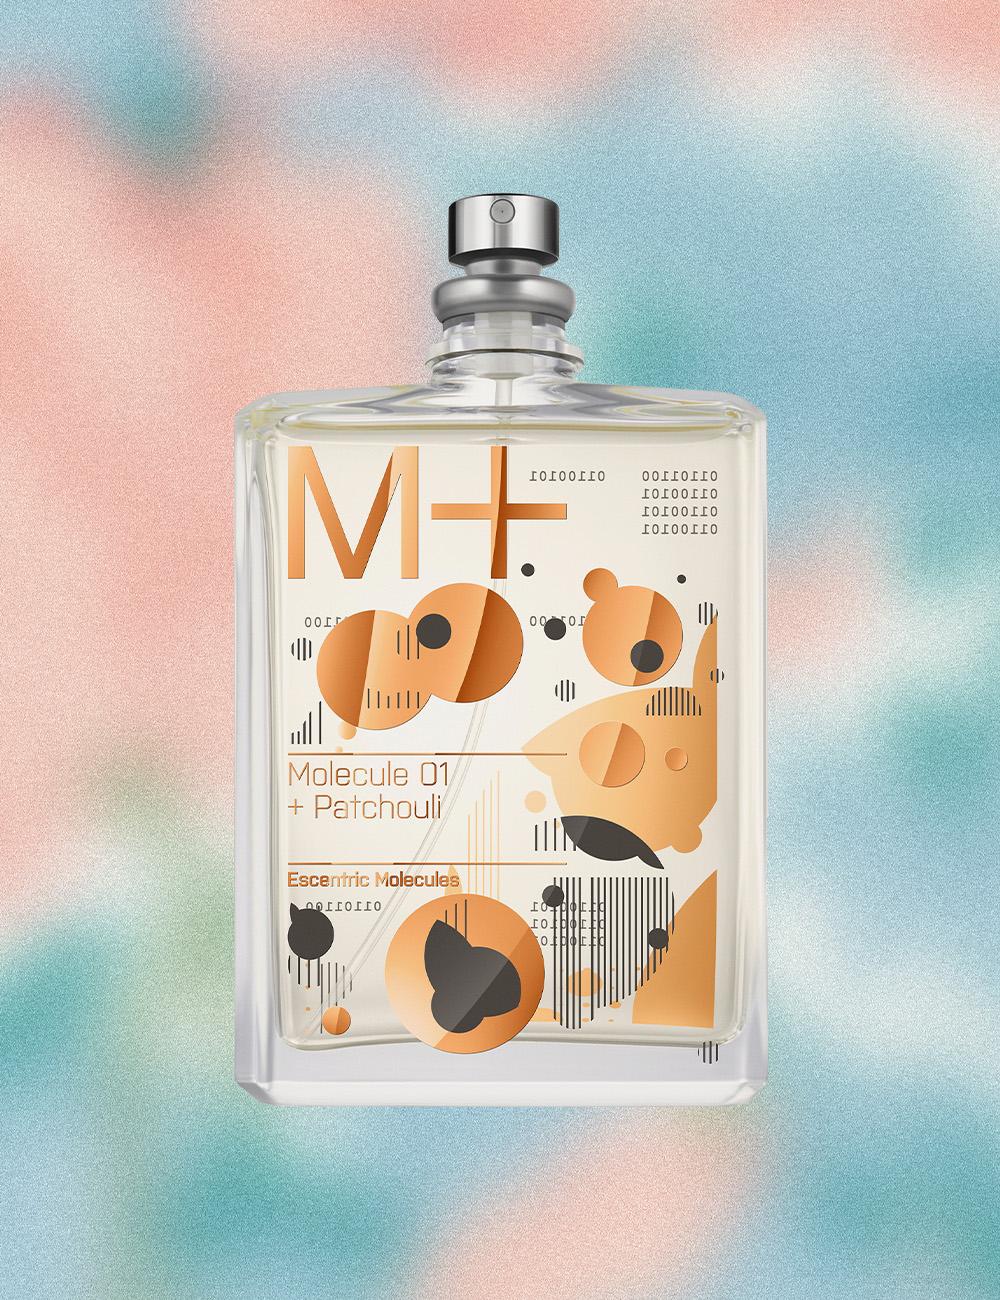 The underrated art of matching perfumes to occasions